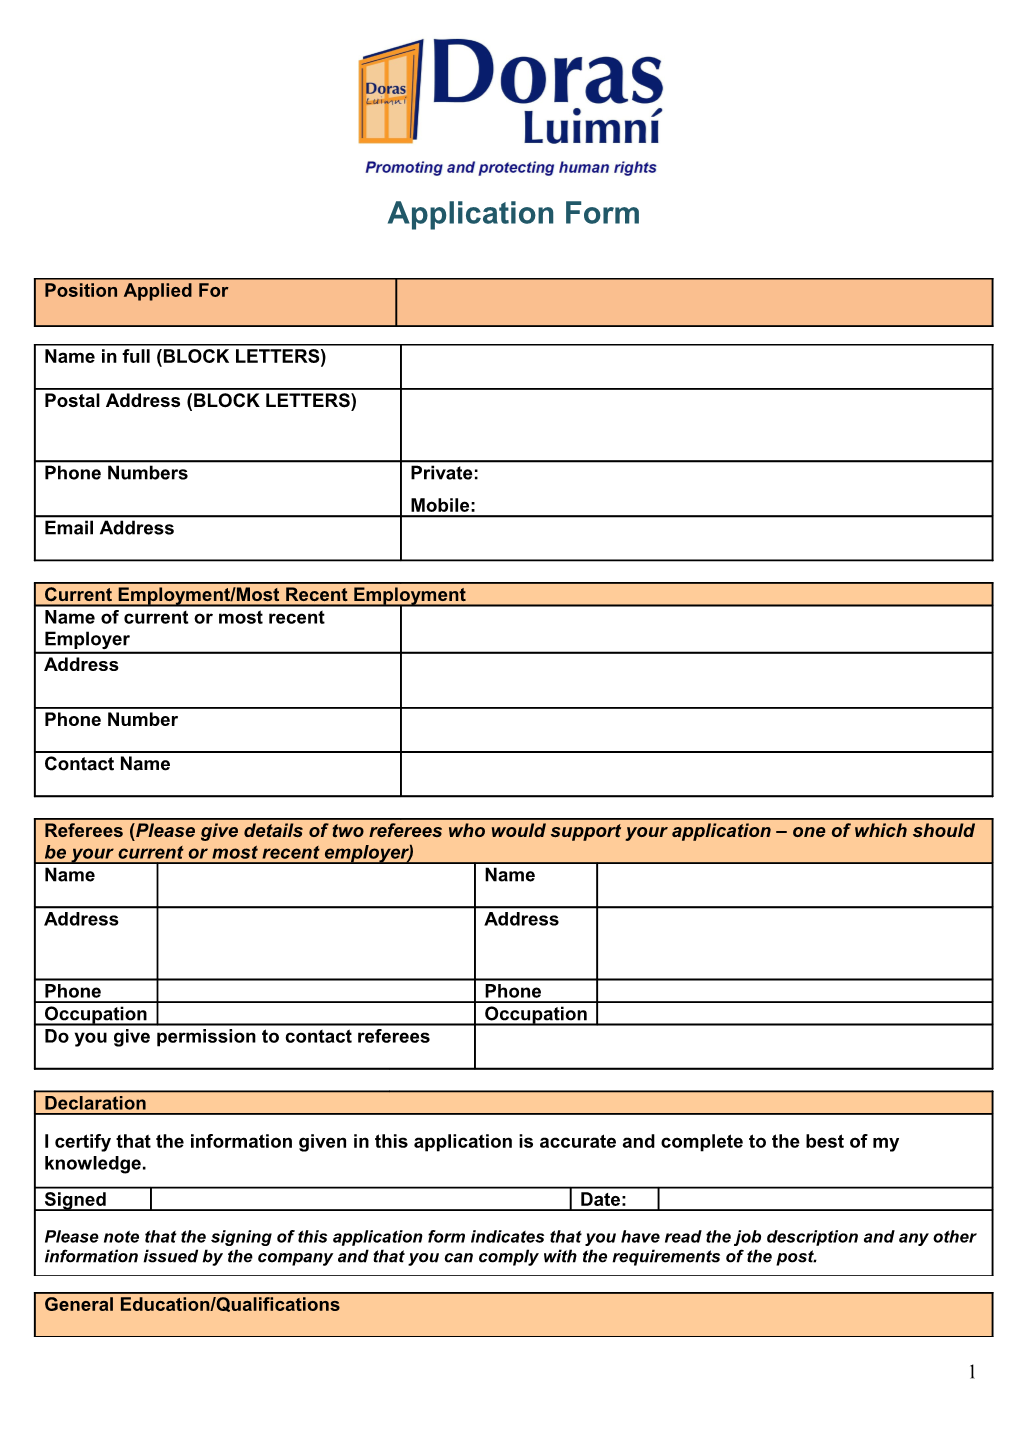 This Application Form, When Completed, Should Be Returned To